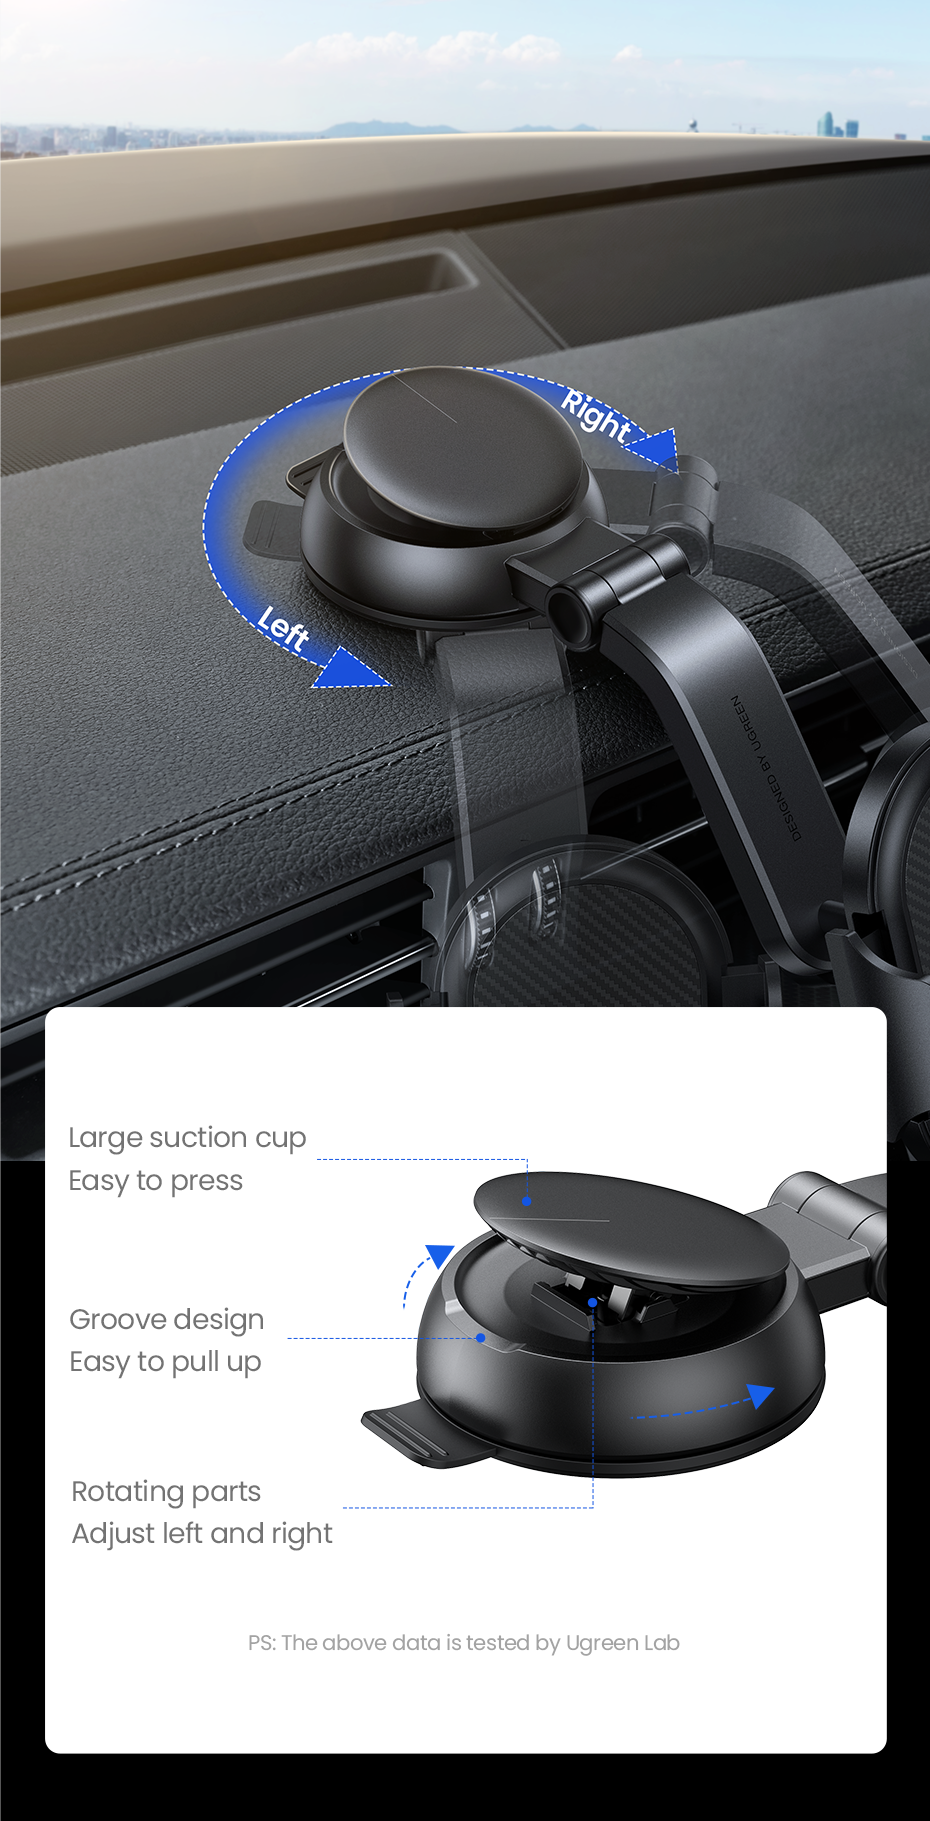 UGREEN Waterfall-shaped Suction Cup Car Holder Gravity Dashboard Phone Holder Universial Mobile Phone Support For iPhone 14 13 Pro Xiaomi for Samsung